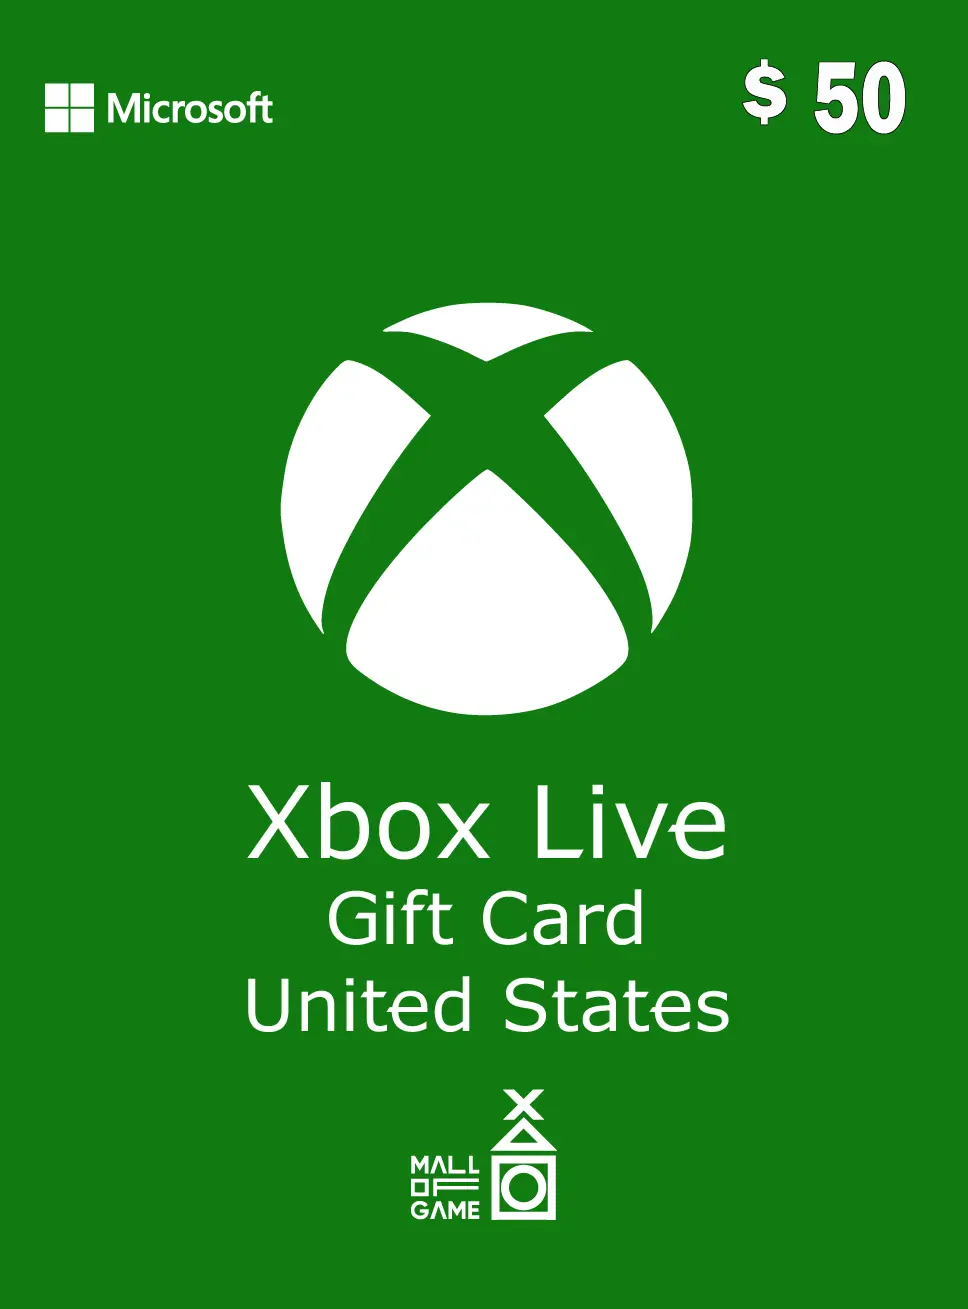 Xbox Live Gift Card - US$ 50